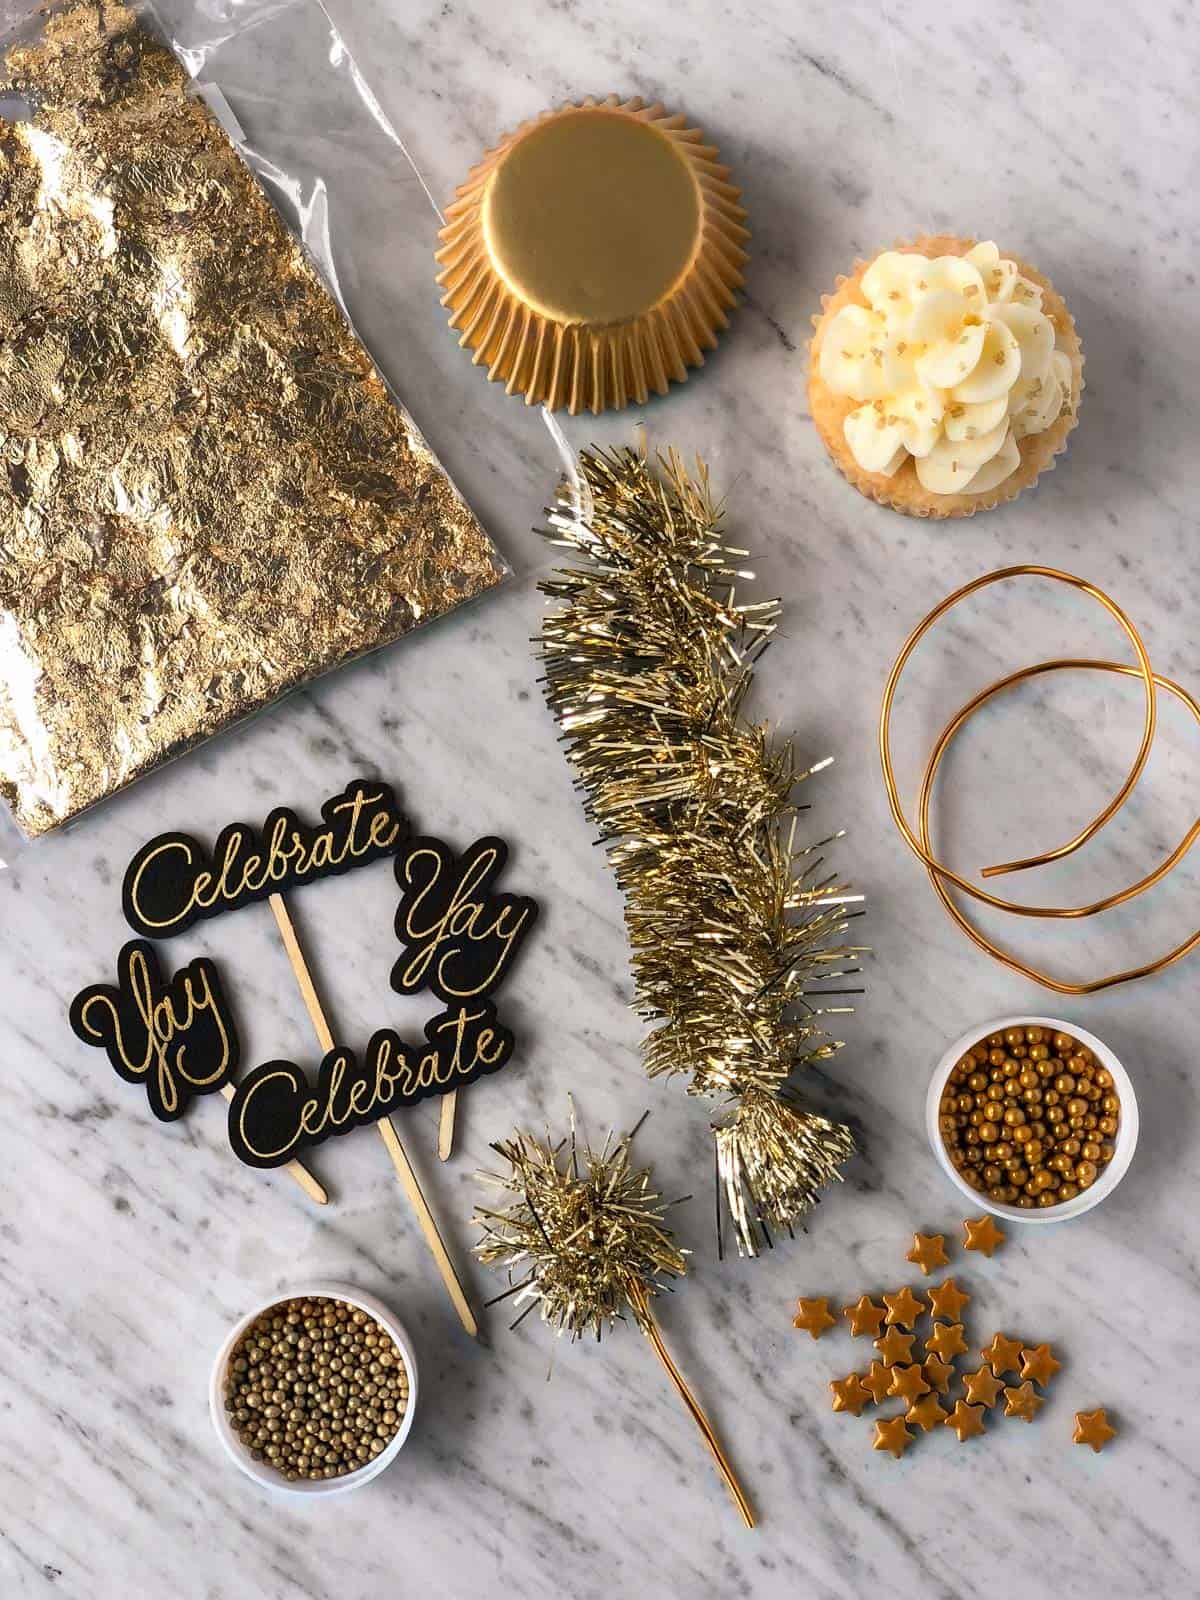 supplies used to decorate new year's eve cupcakes including gold sprinkles, gold stars, gold muffin liners, edible gold leaf, celebrate cupcake toppers, and gold tinsel